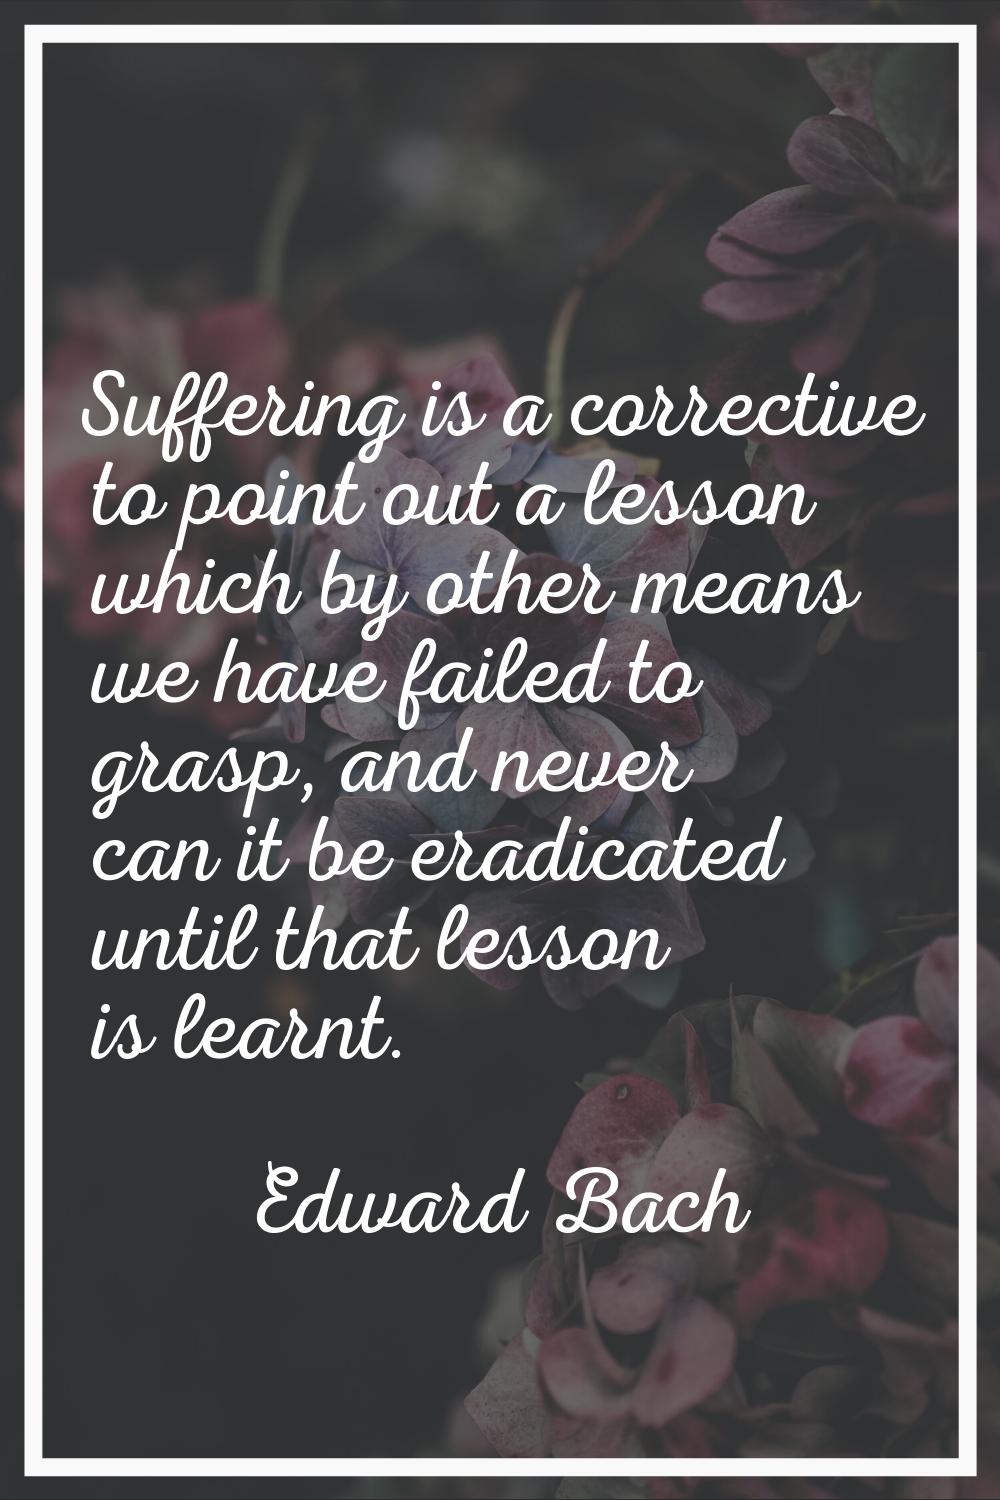 Suffering is a corrective to point out a lesson which by other means we have failed to grasp, and n